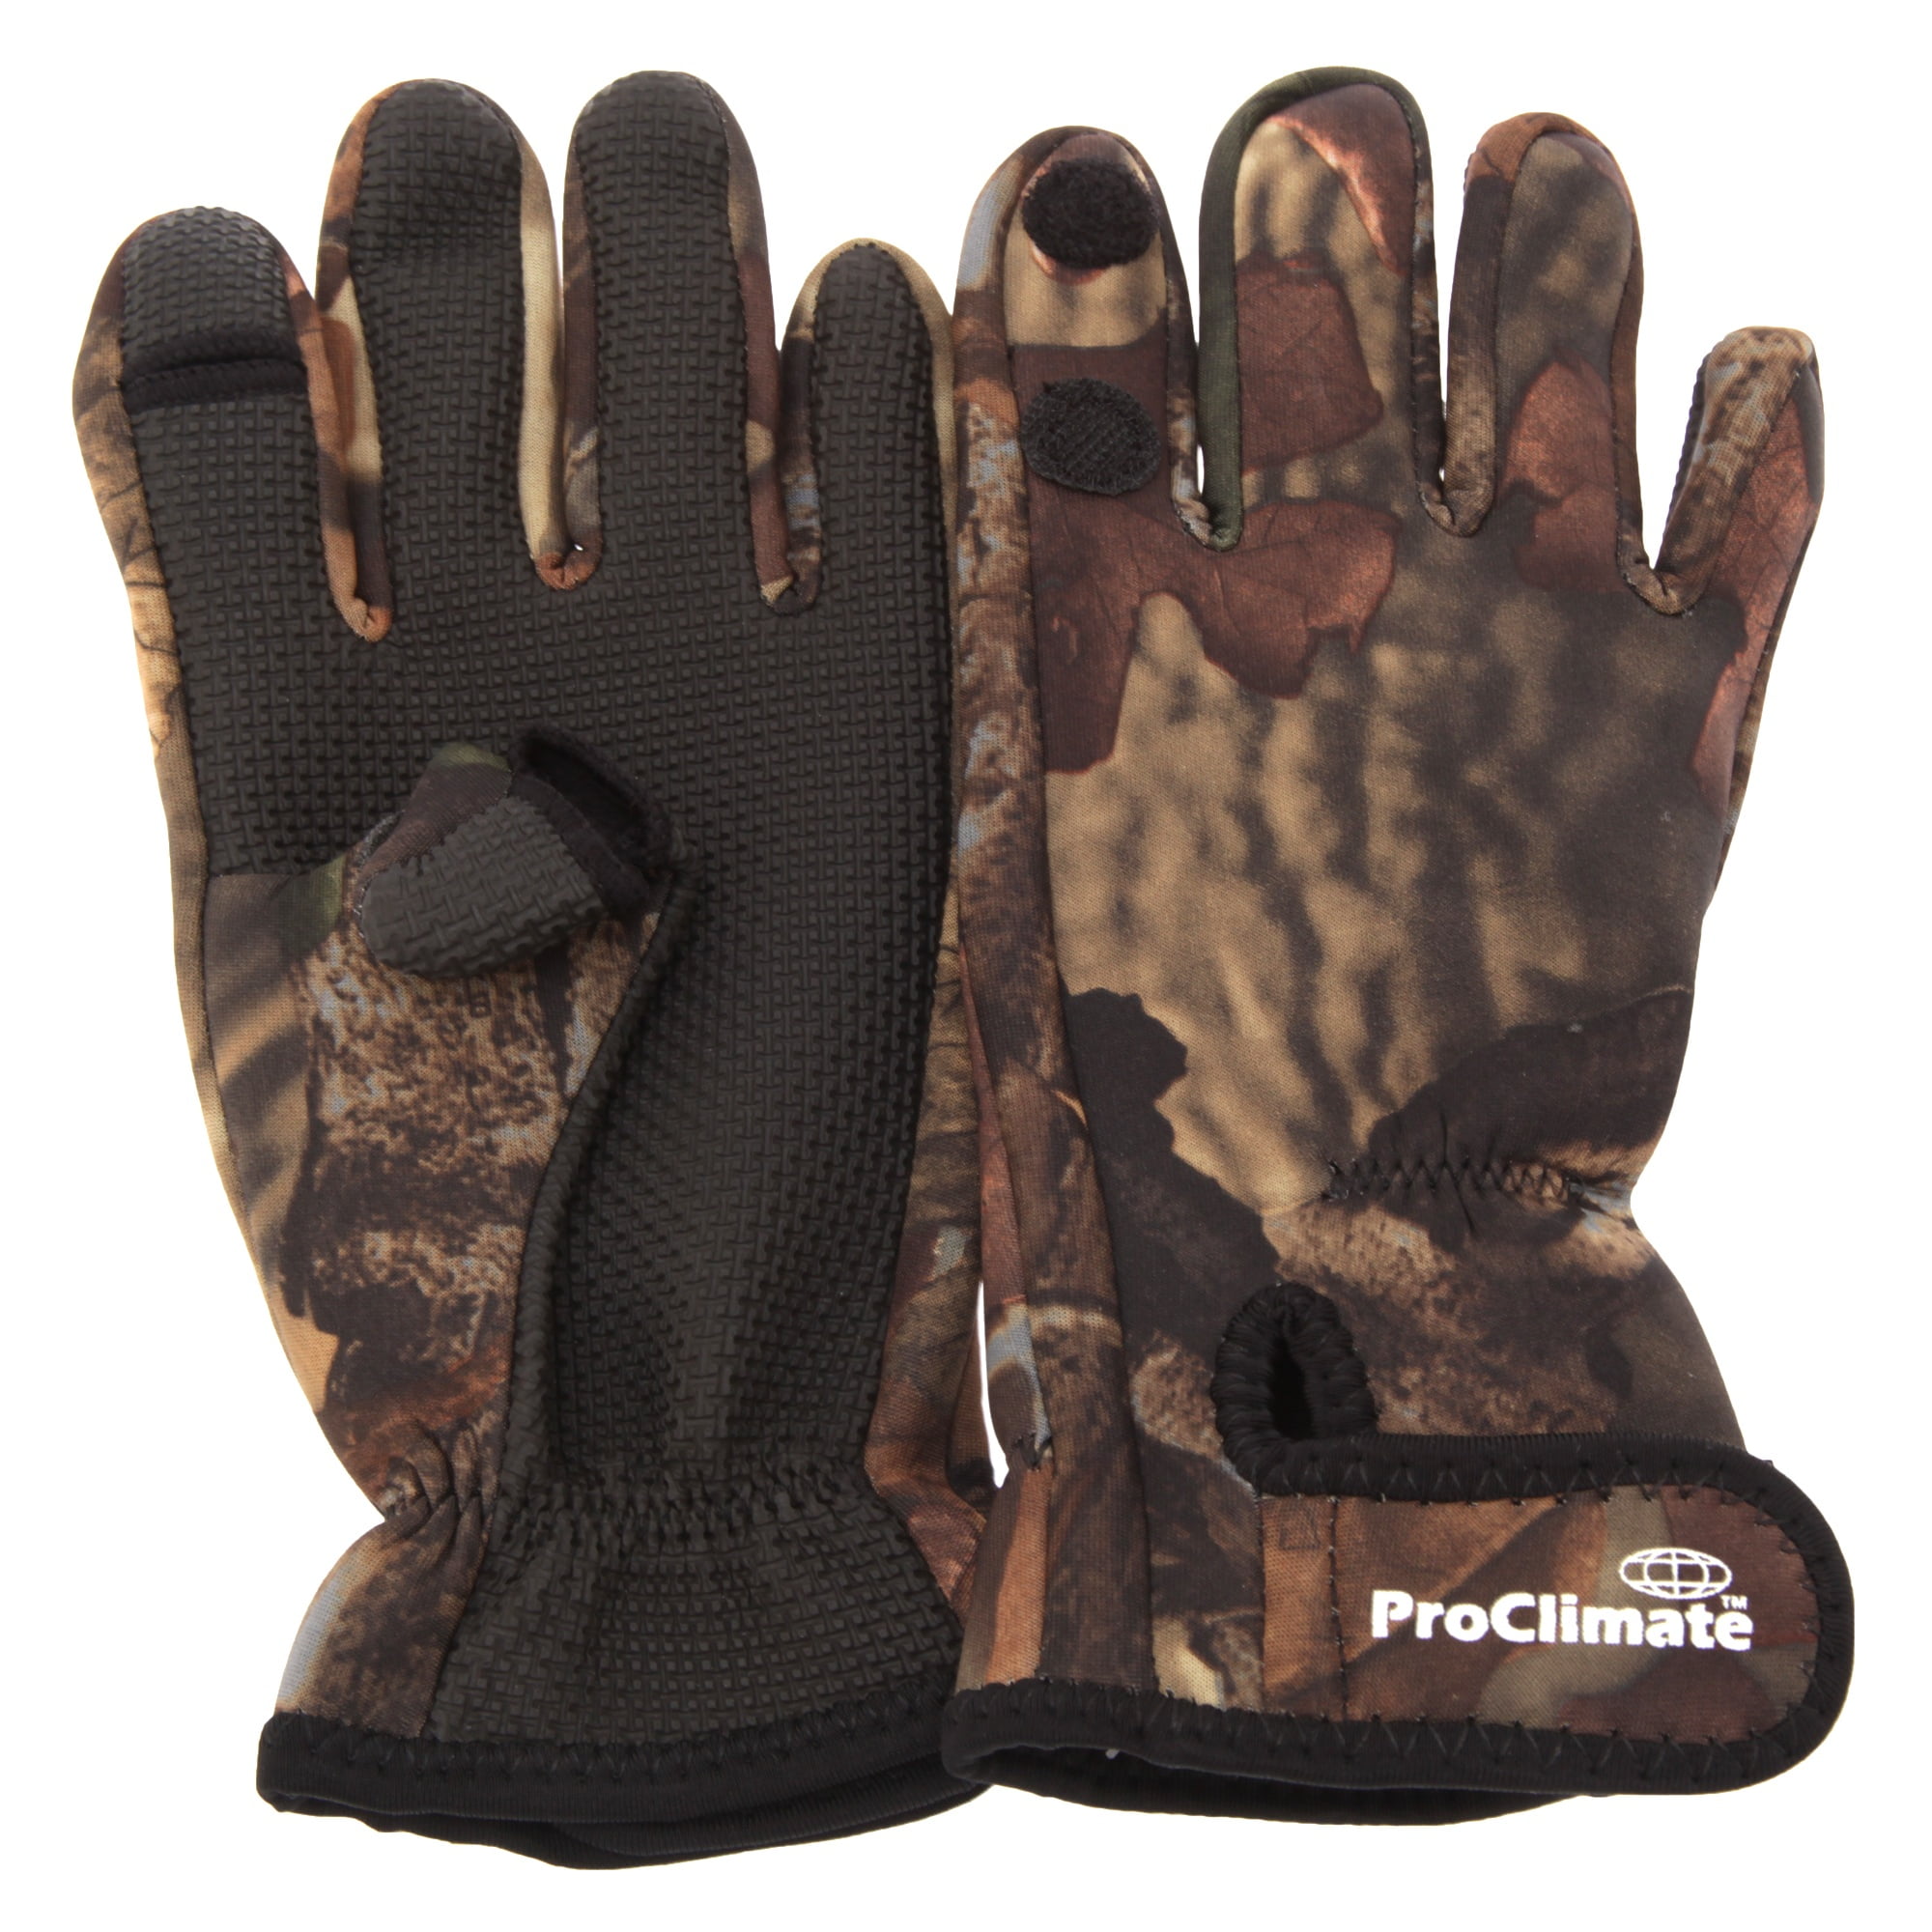 Pro Climate Mens Neoprene with Textured Grip Camo Fishing Gloves 